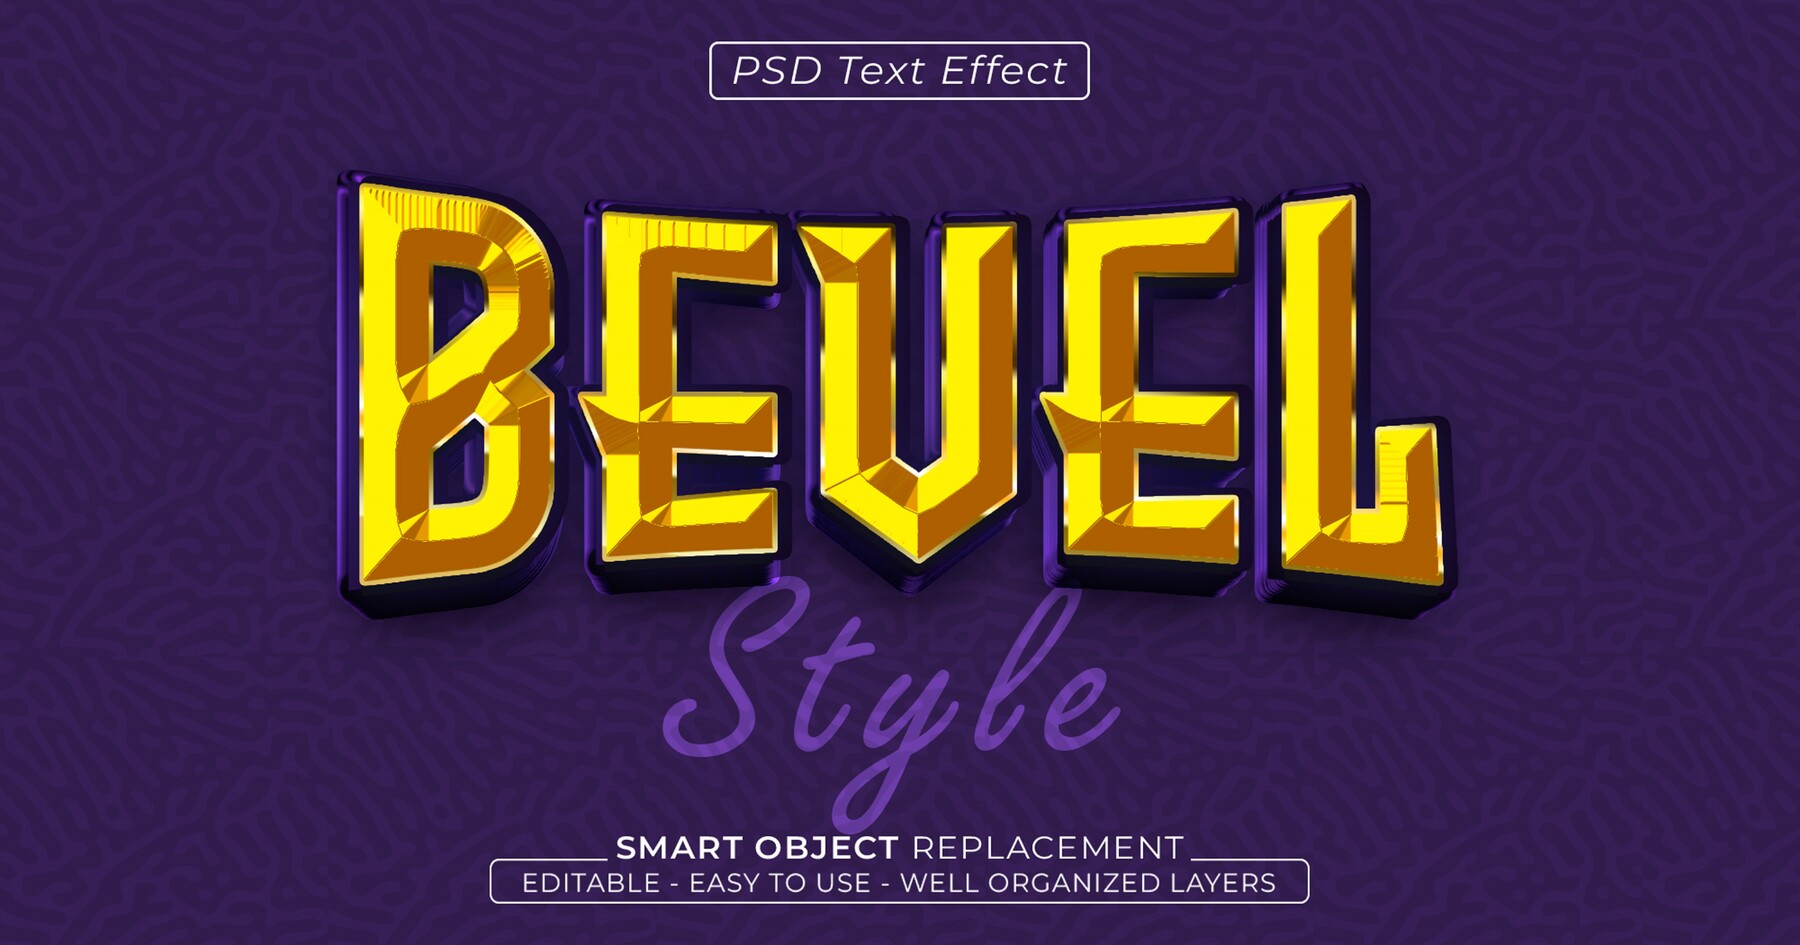 ArtStation - Bevel PSD fully editable text effect. Layer style PSD